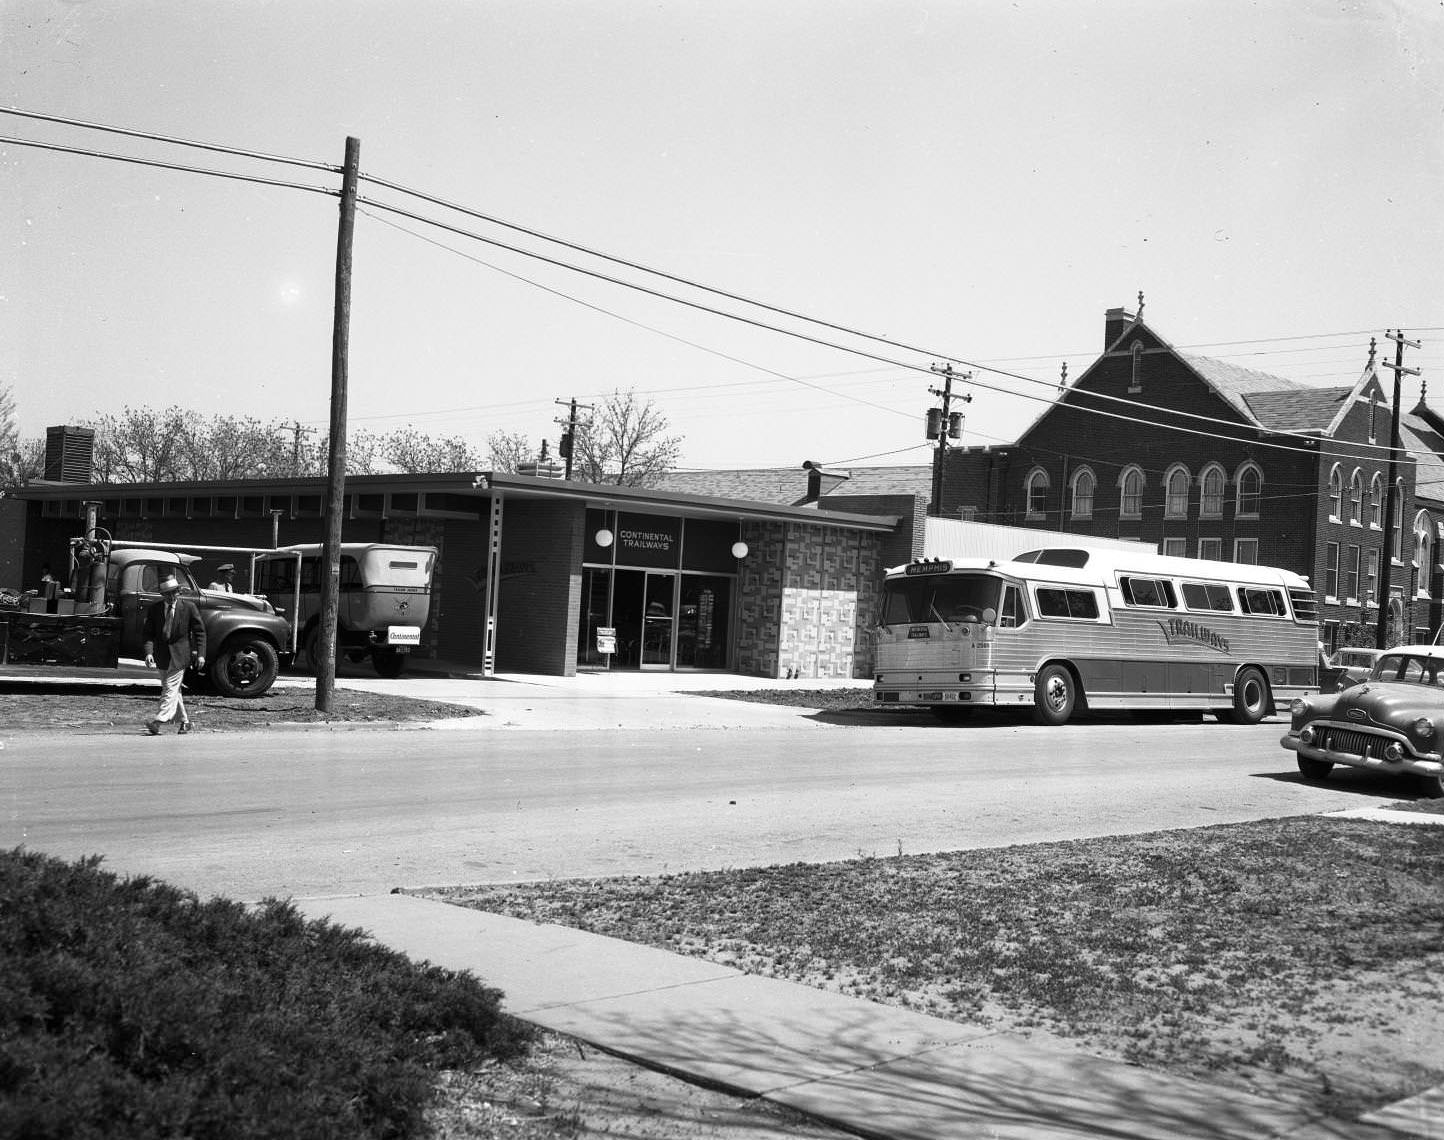 A Trailways bus in front of a Continental Trailways building, 1955